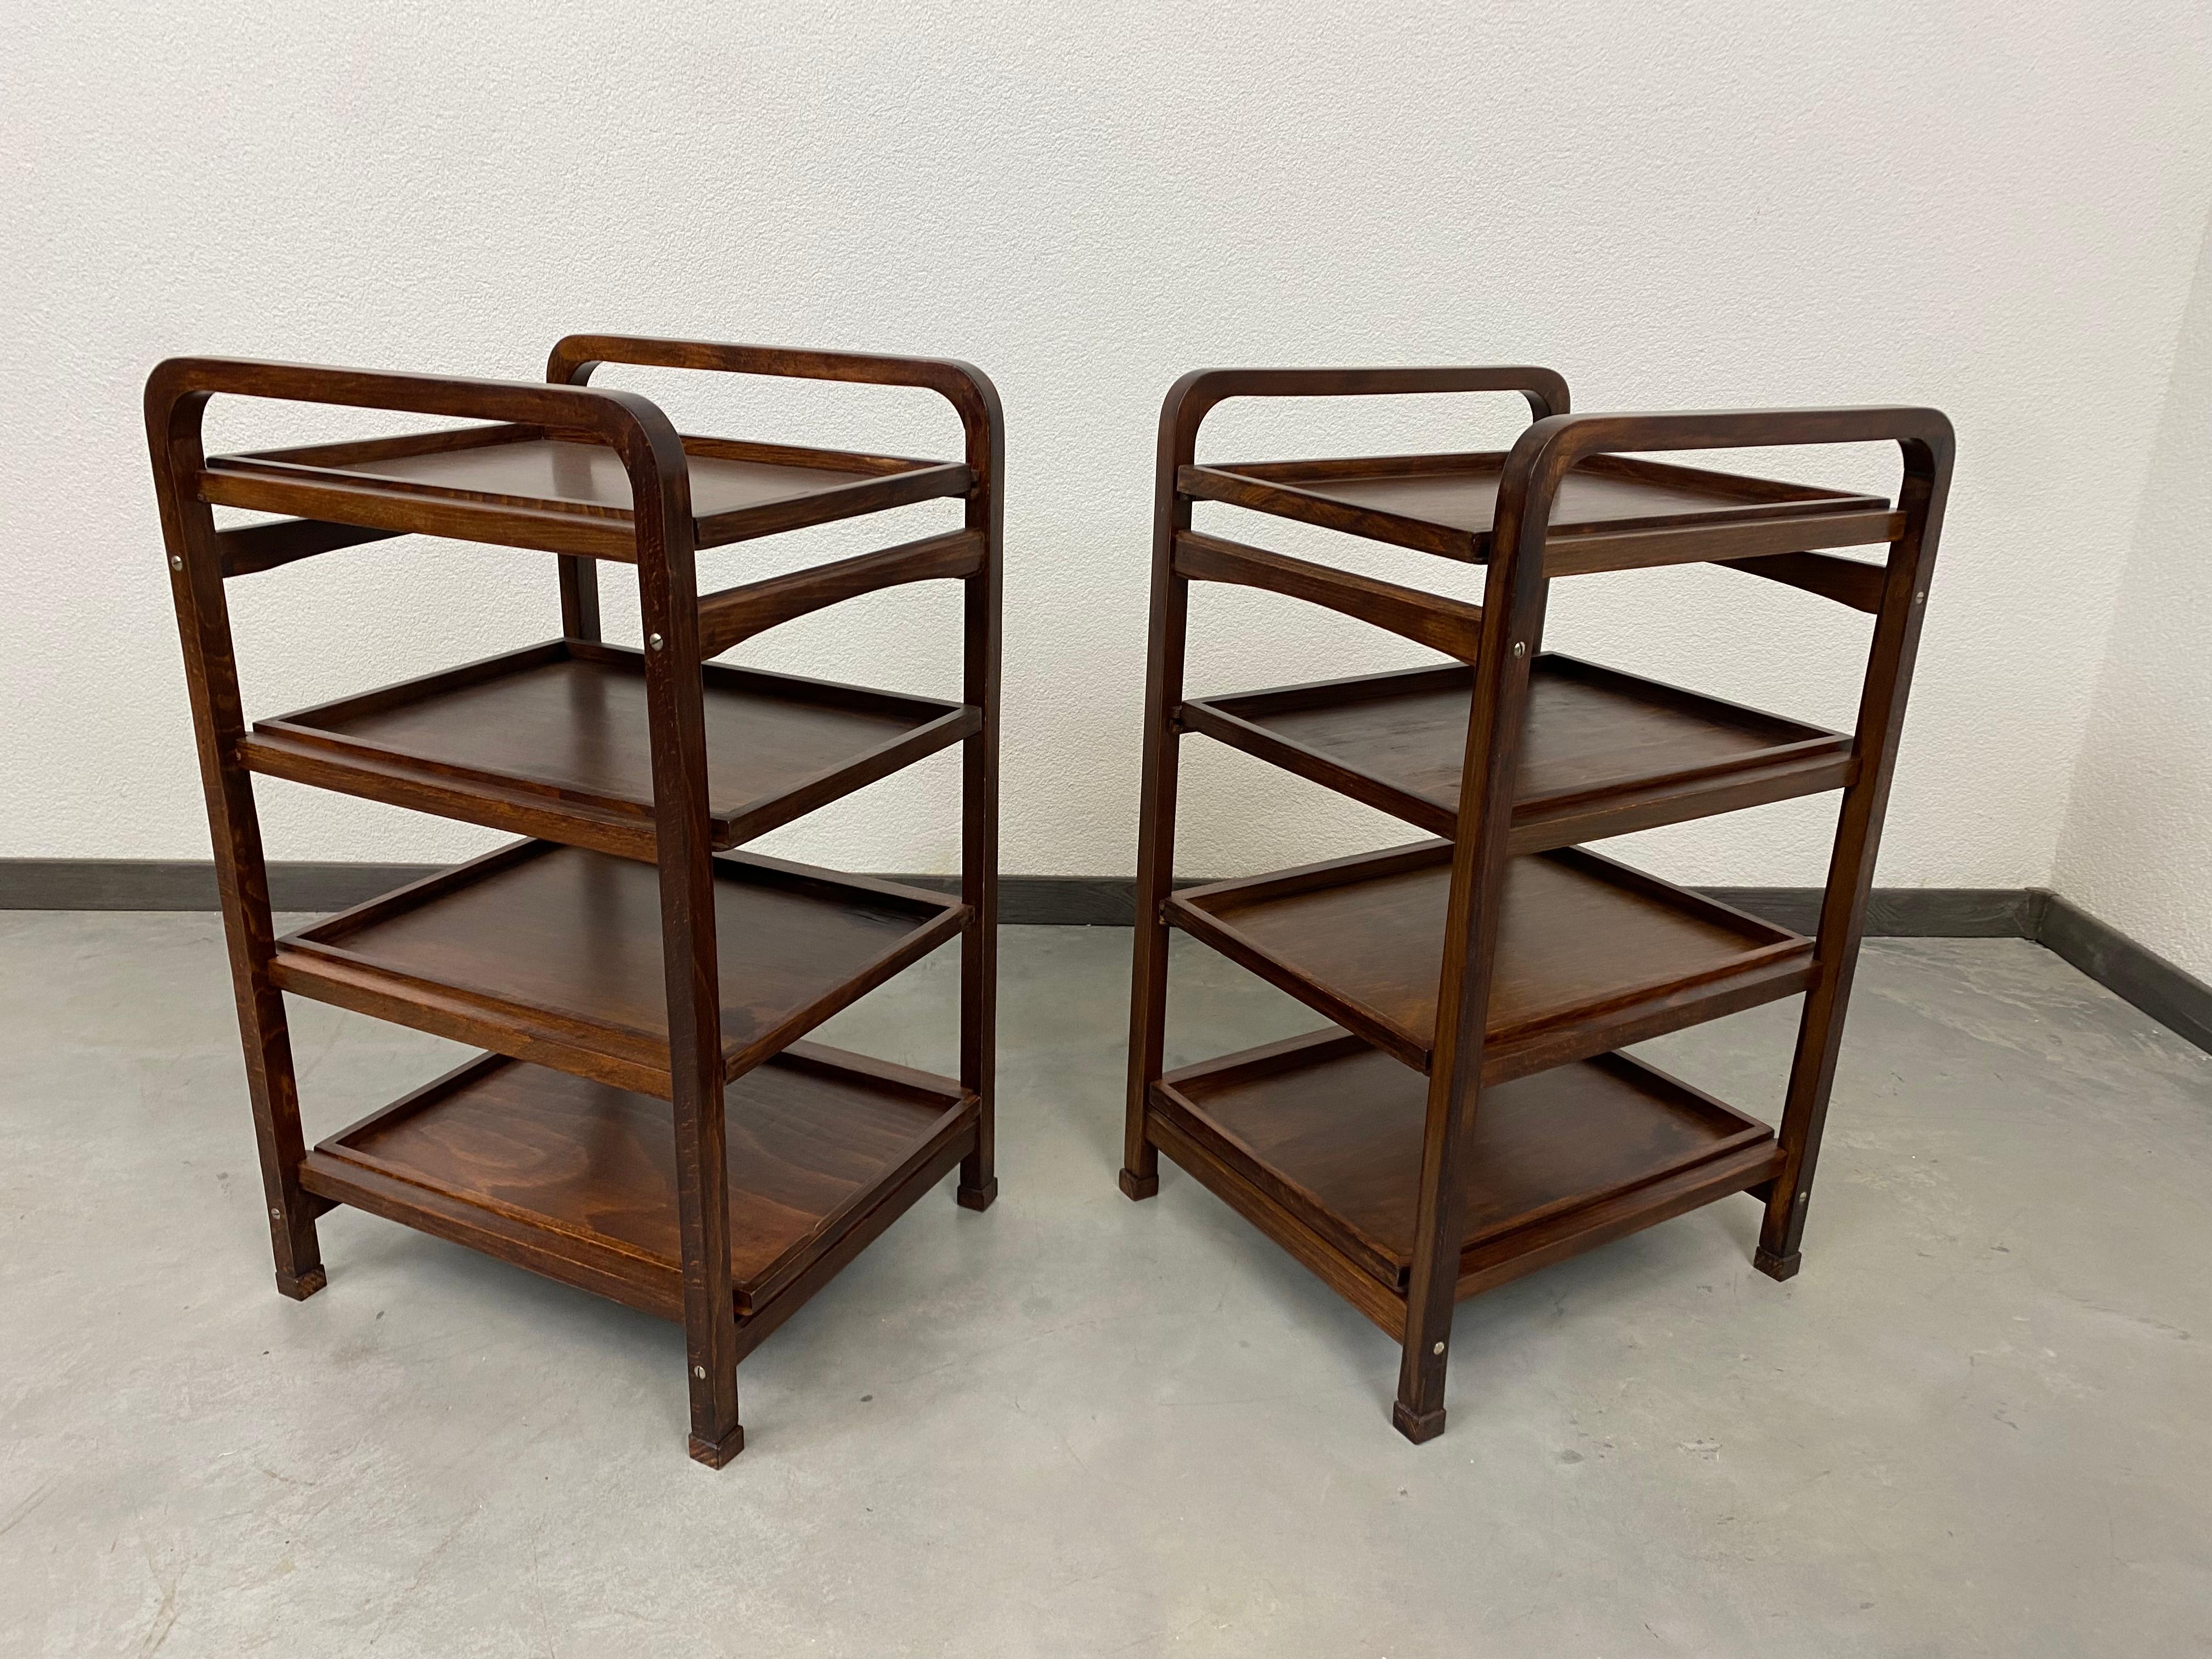 Thonet bentwood sheves professionally stained and repolished.